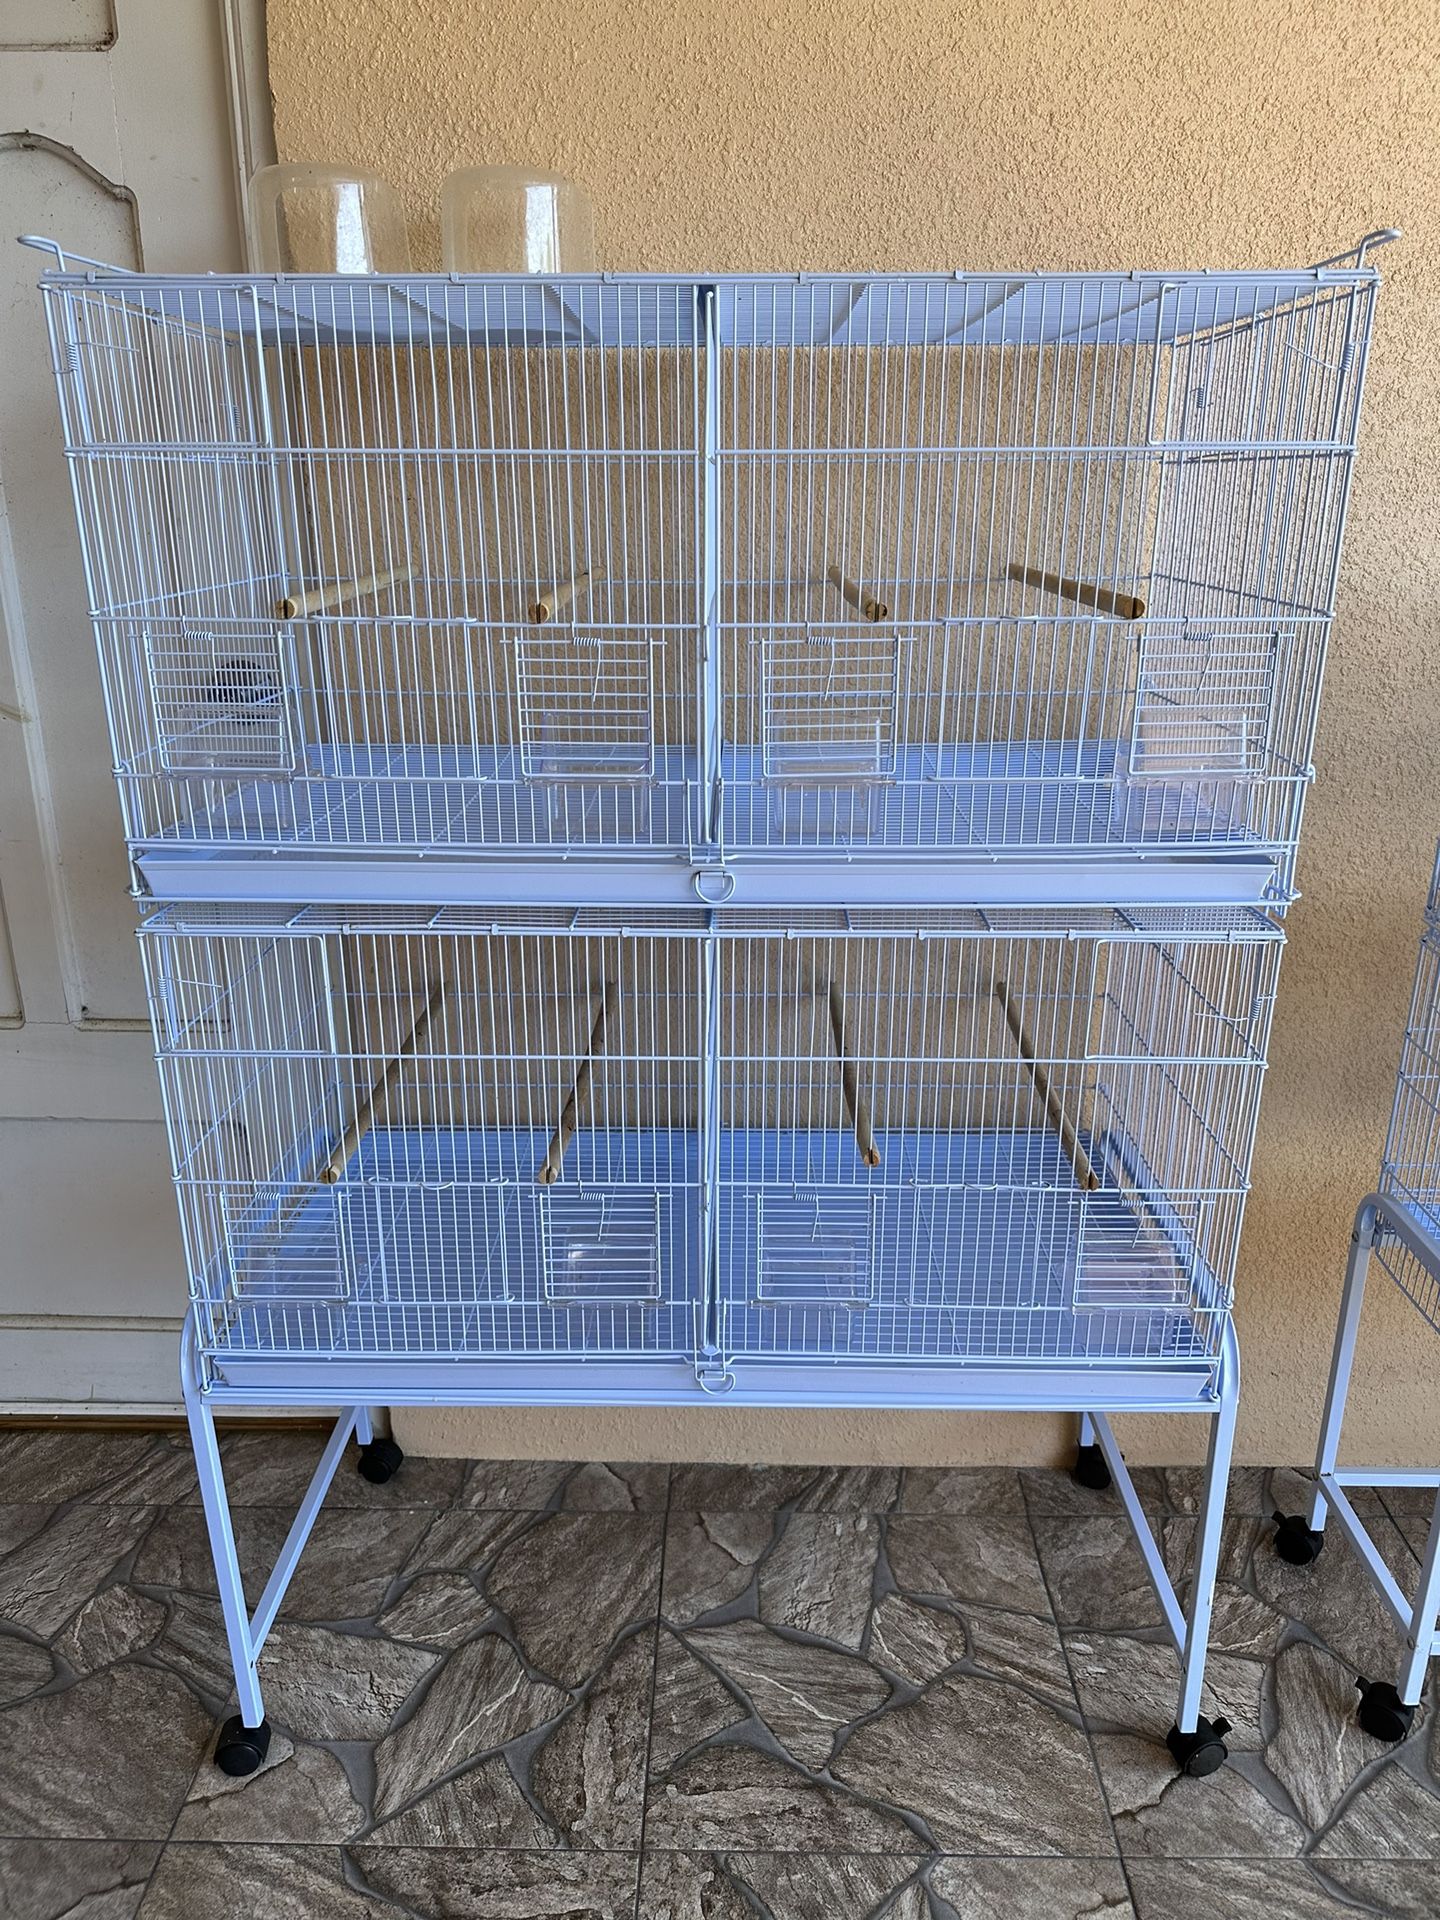 Birdcage Multi 4 Cage with Stand For Breeding Etc…